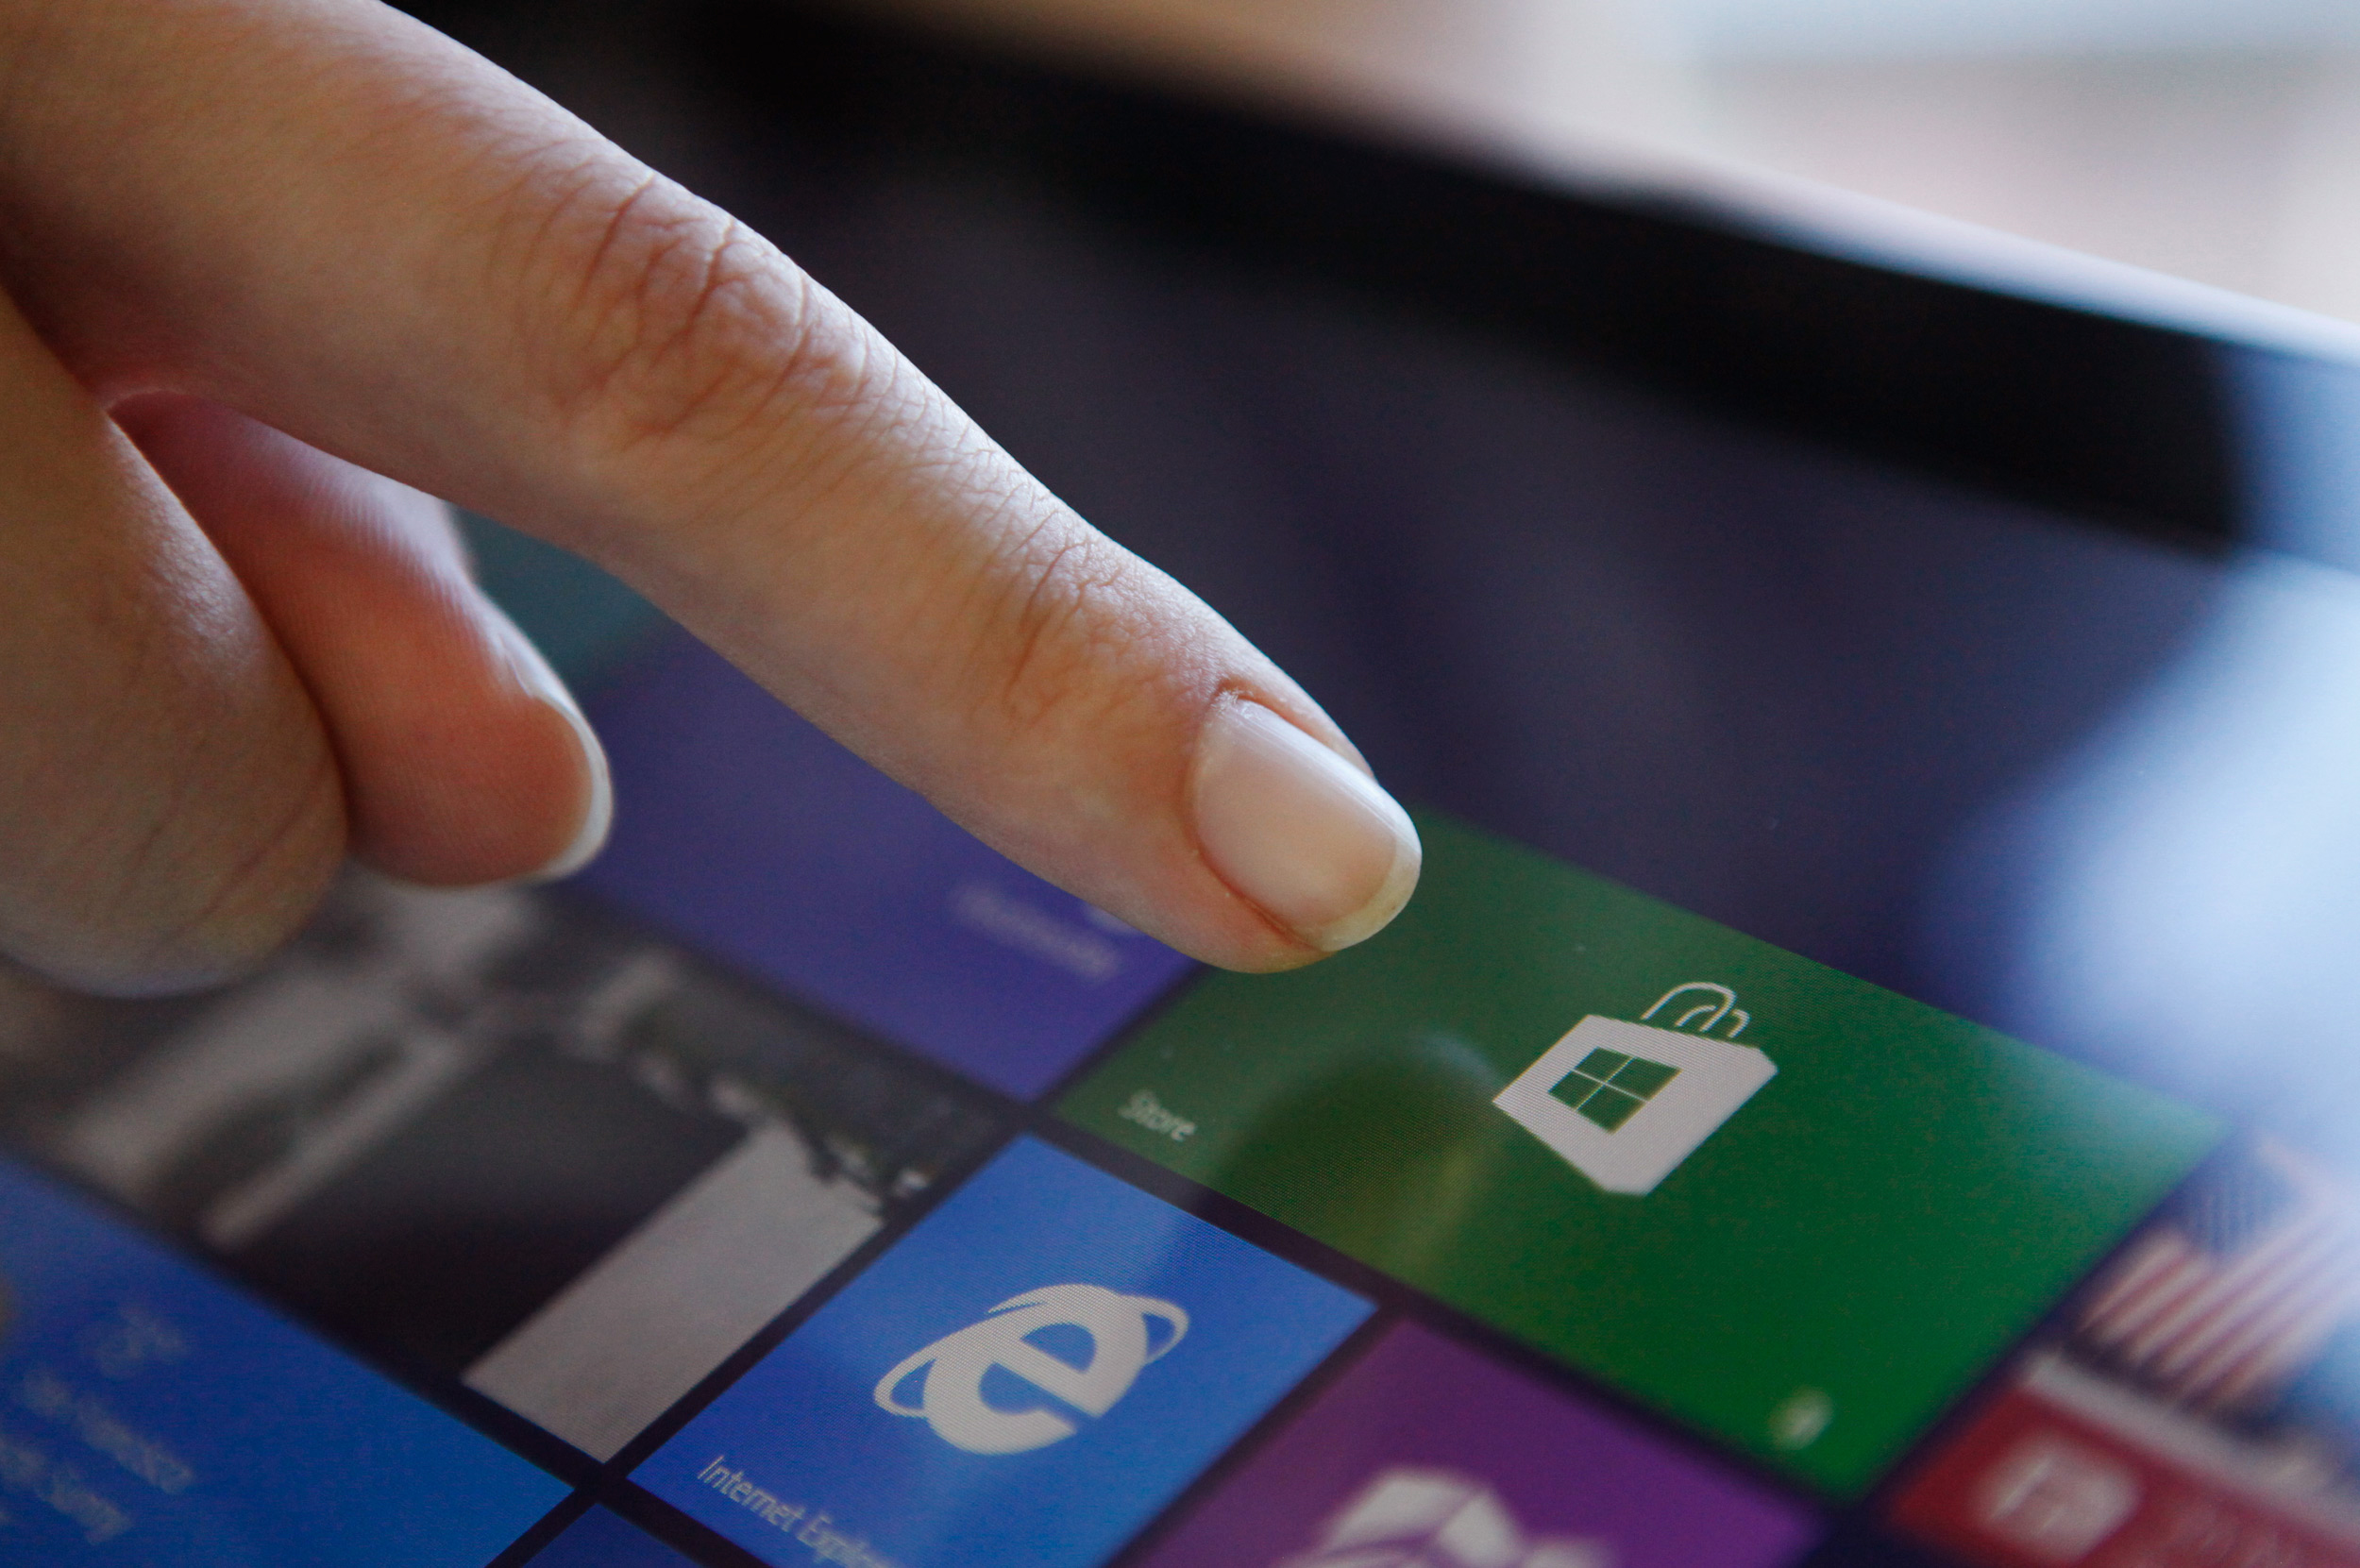 Is Windows 8 Just For Touch Screen Devices?